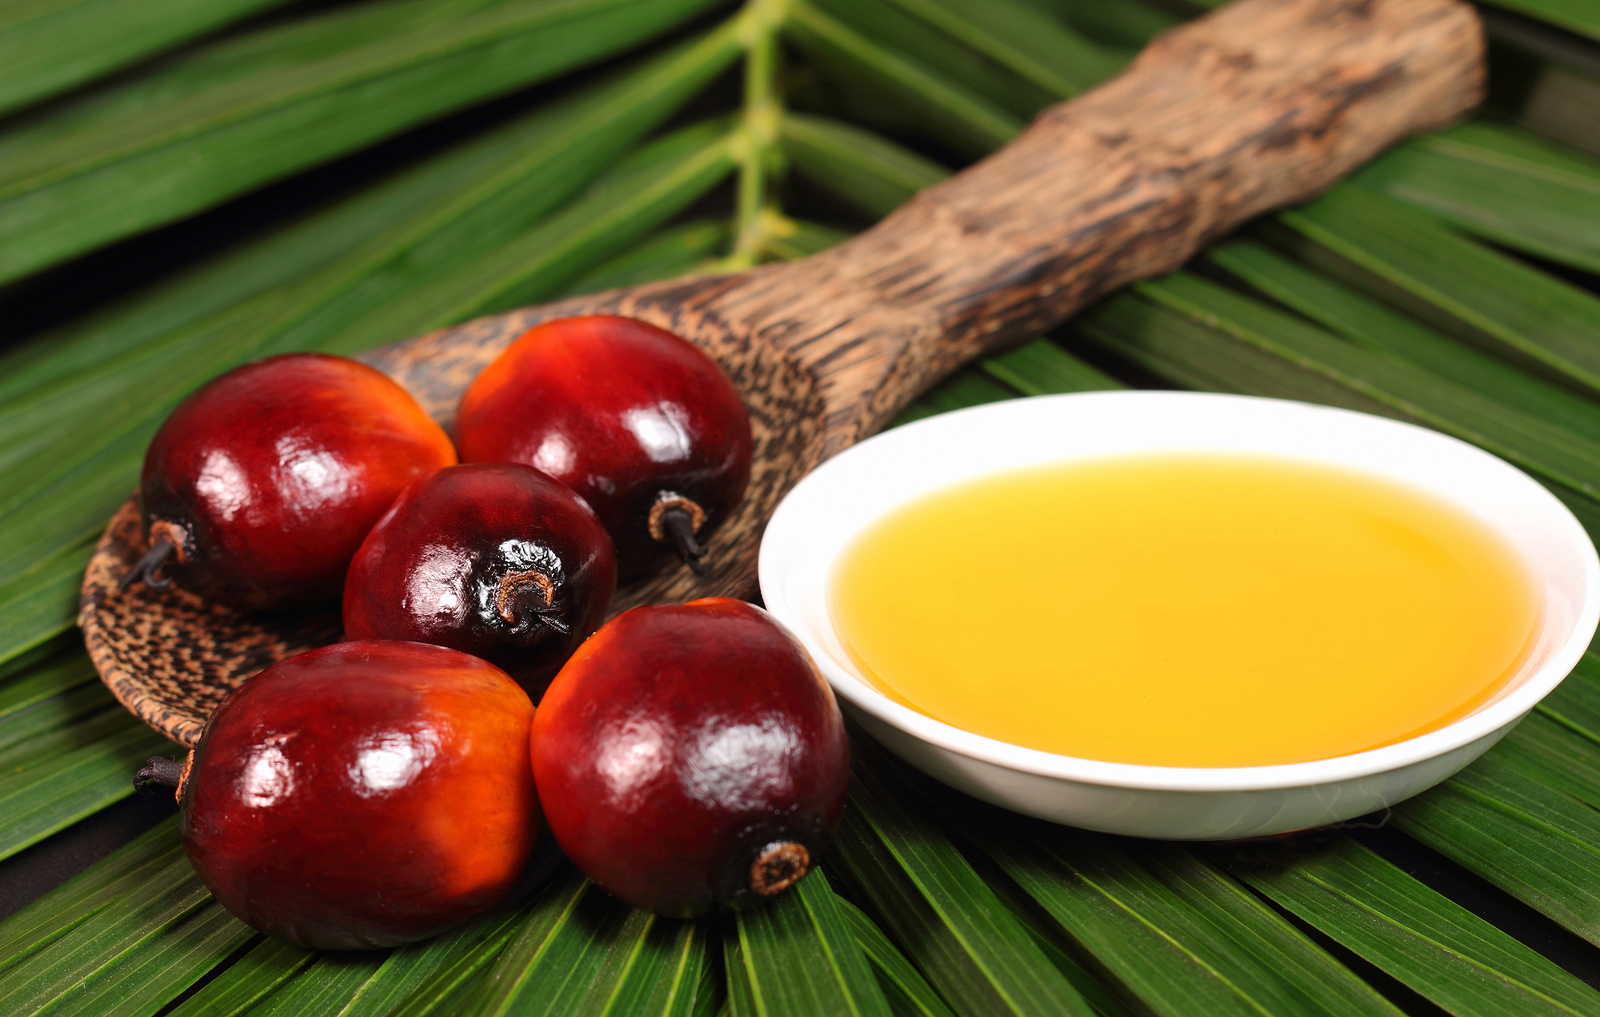 Does Palm Oil Have Health Benefits?